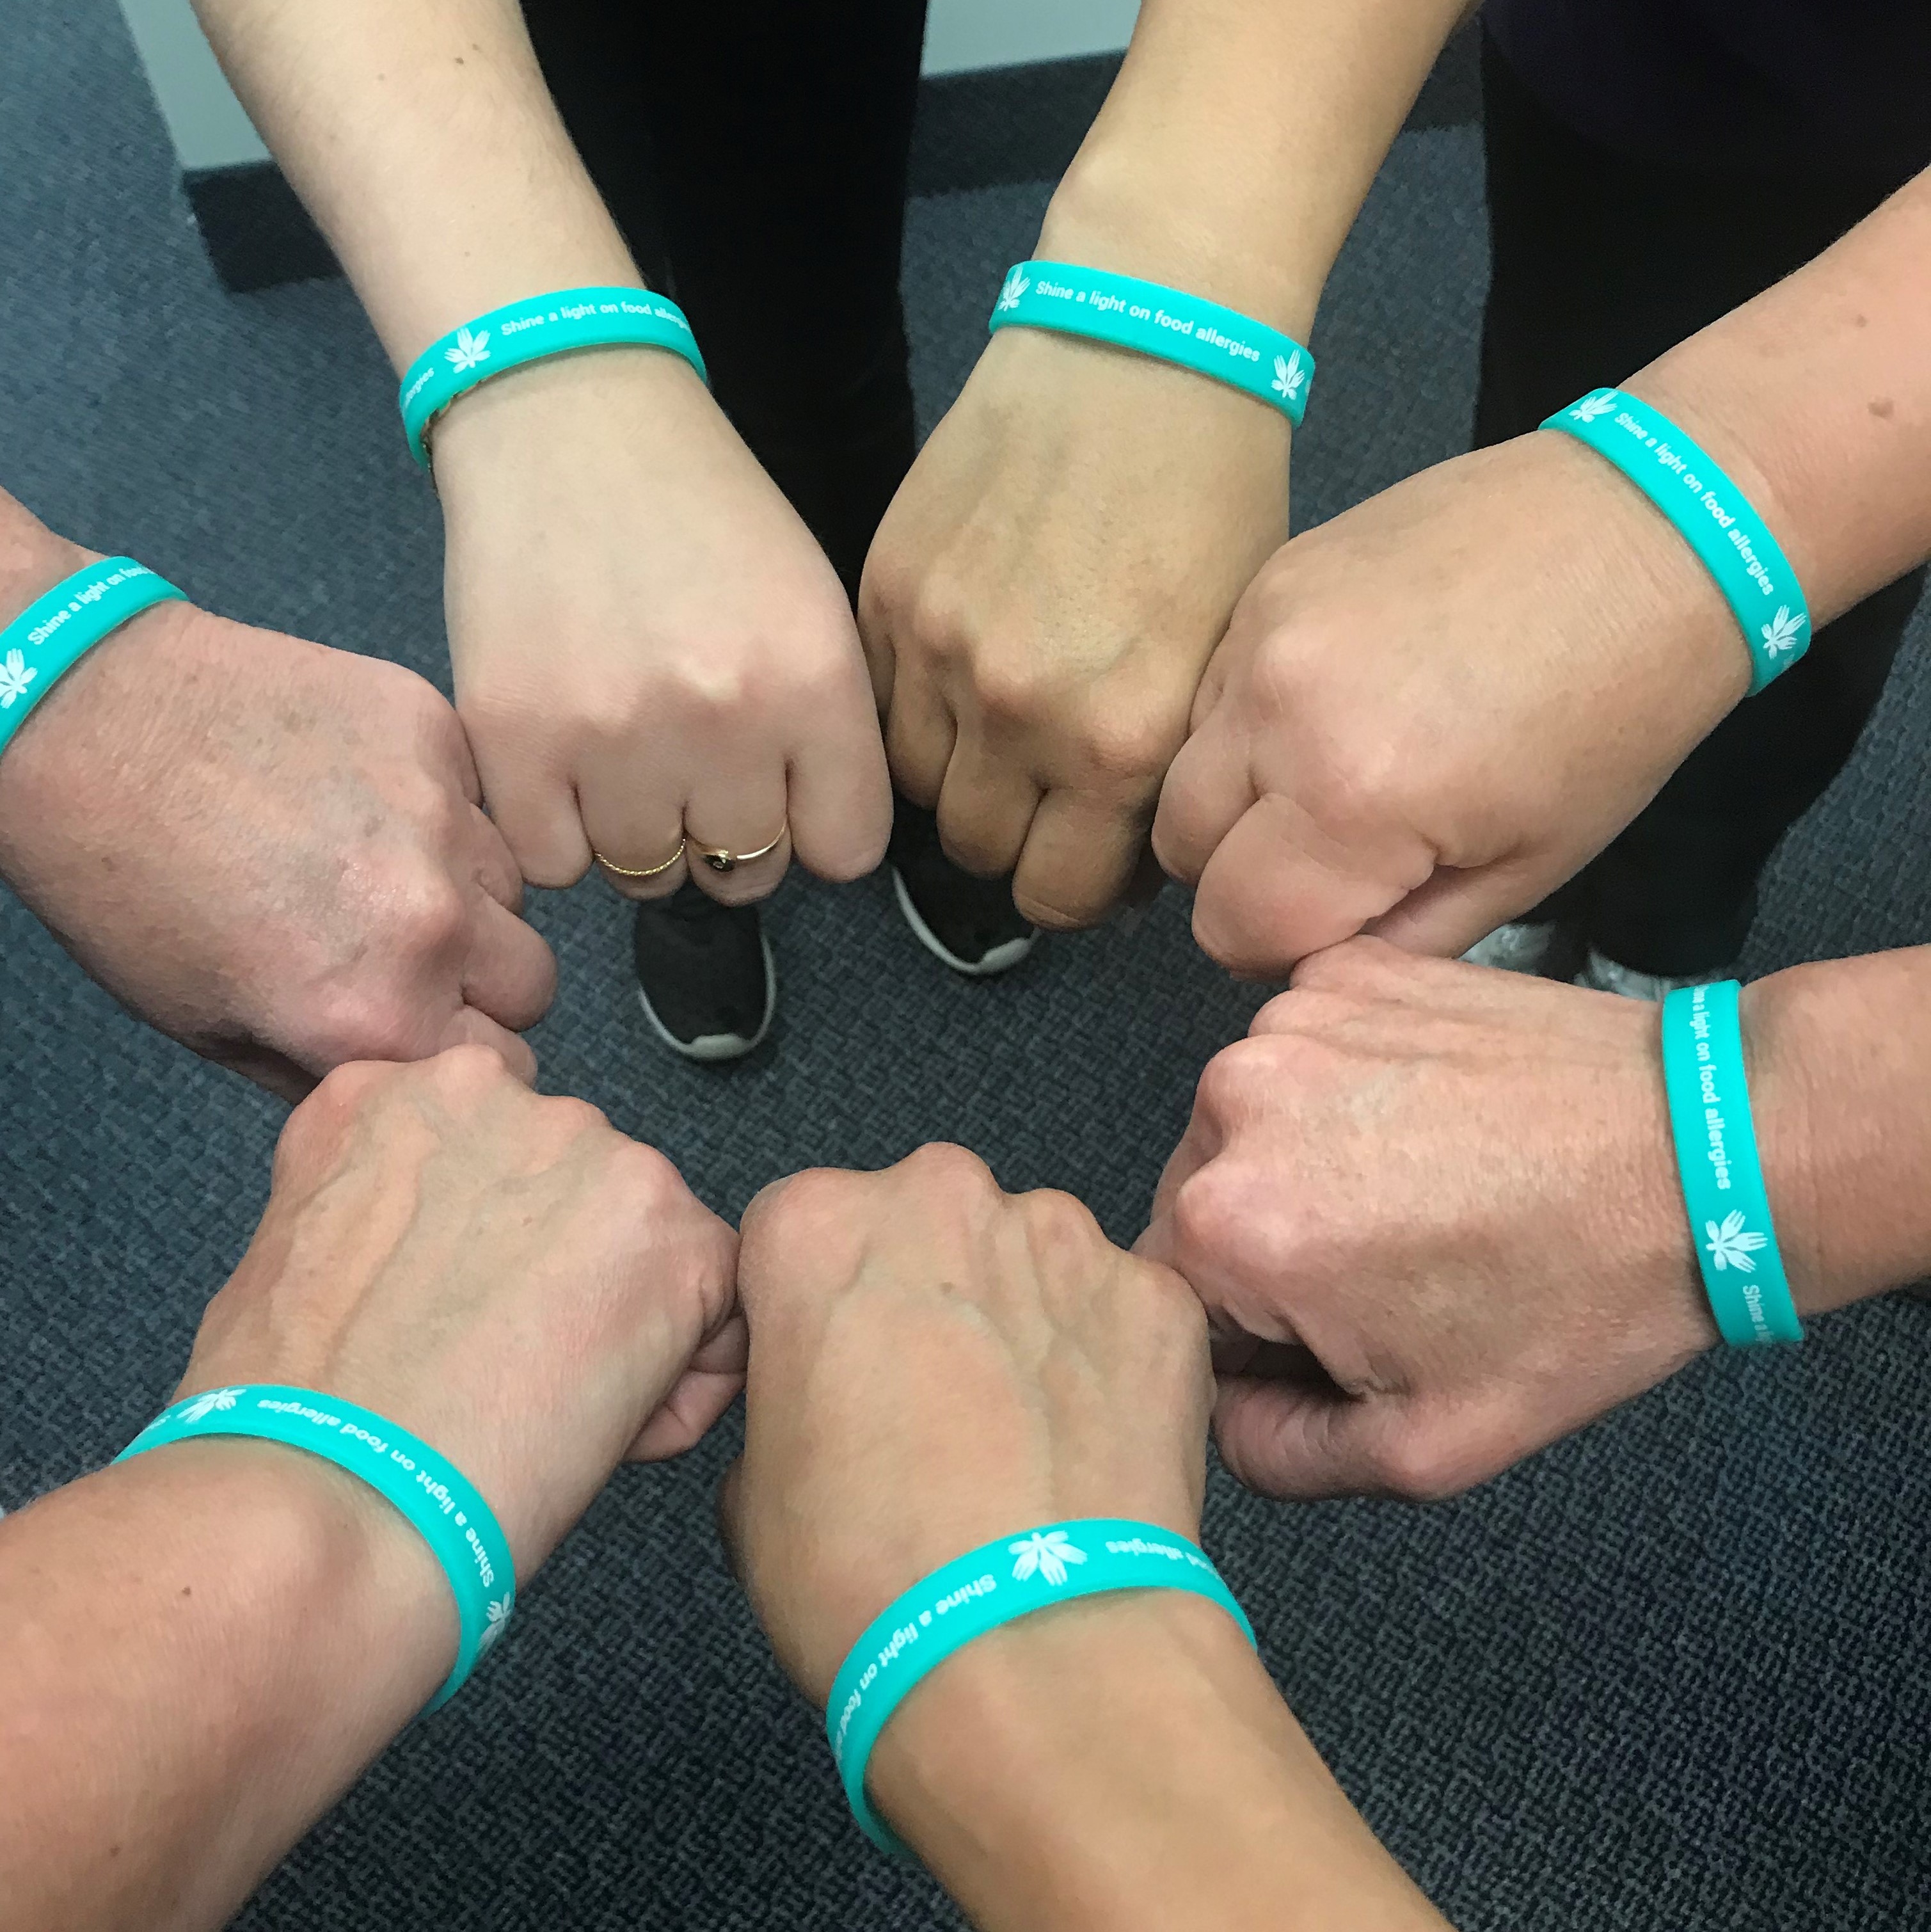 Food Allergy Canada team with team wearing teal shine a light bracelets